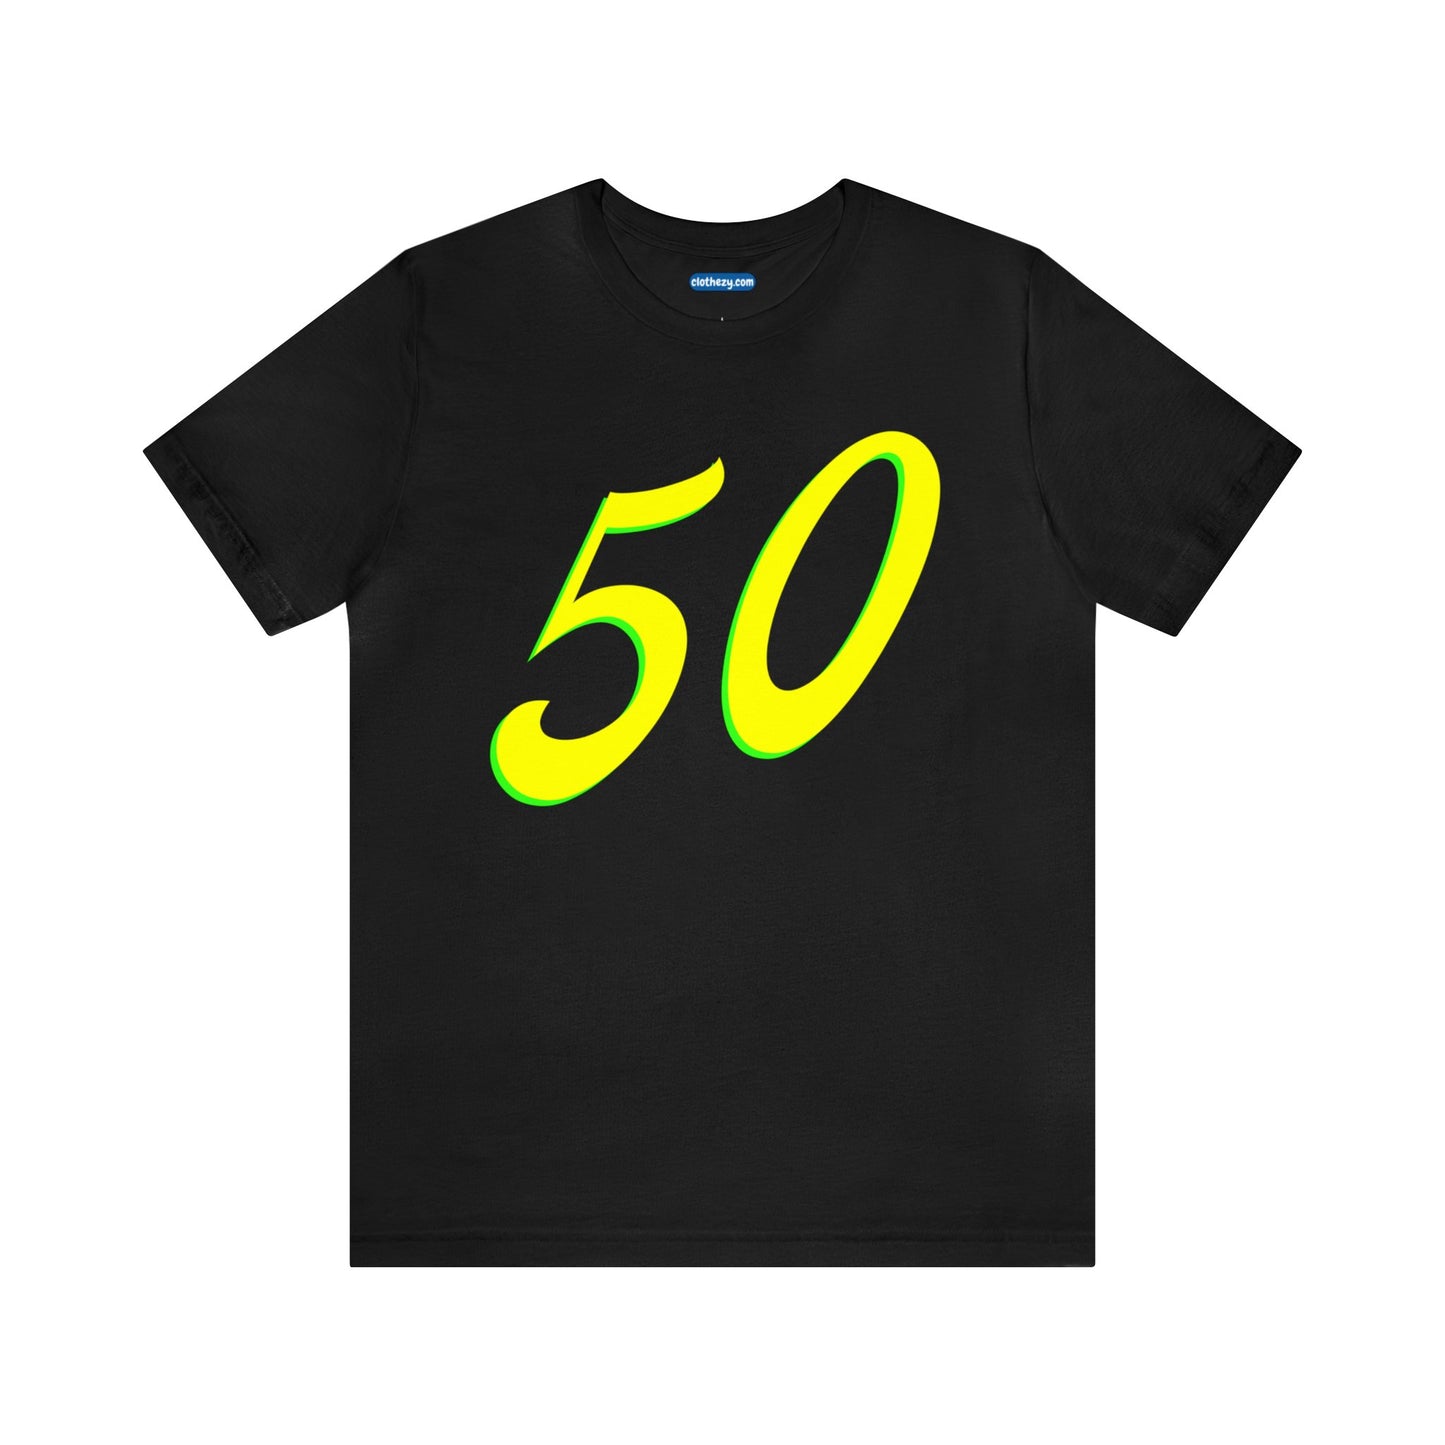 Number 50 Design - Soft Cotton Tee for birthdays and celebrations, Gift for friends and family, Multiple Options by clothezy.com in Dark Grey Heather Size Small - Buy Now